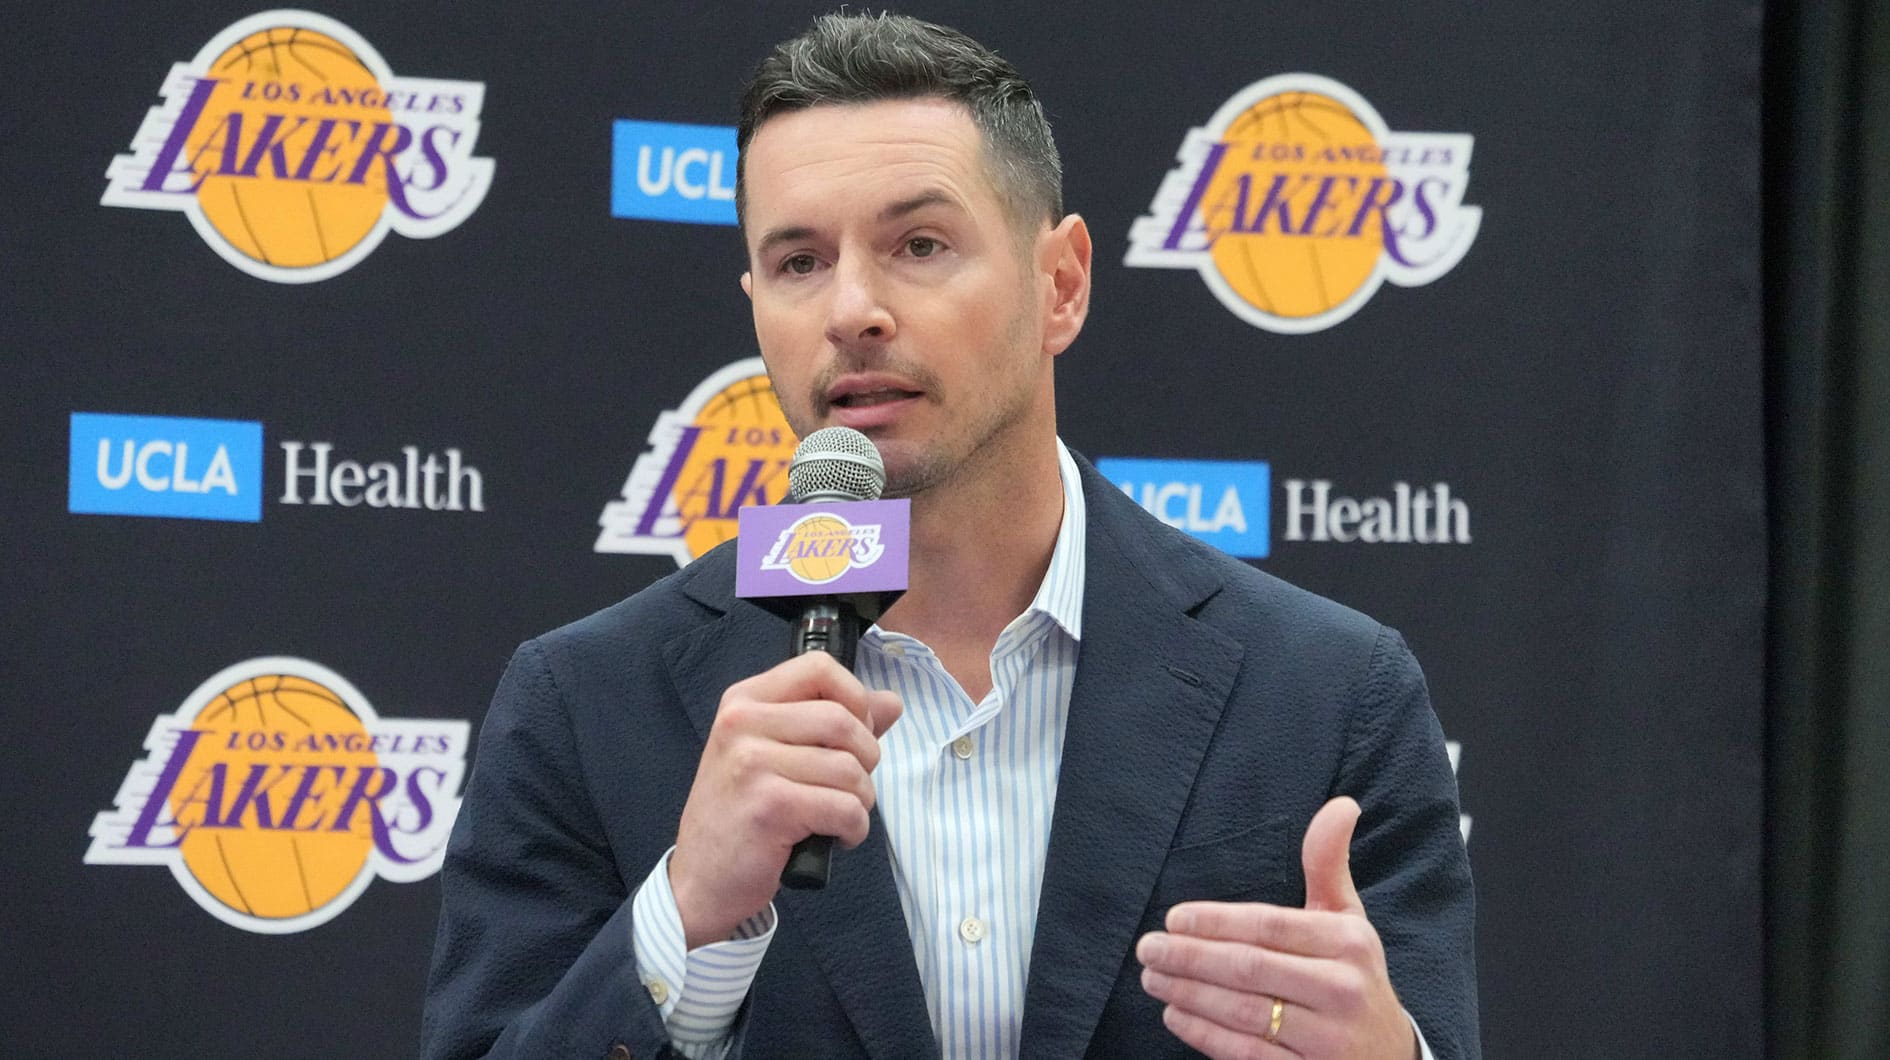 Los Angeles Lakers coach JJ Redick at a press conference